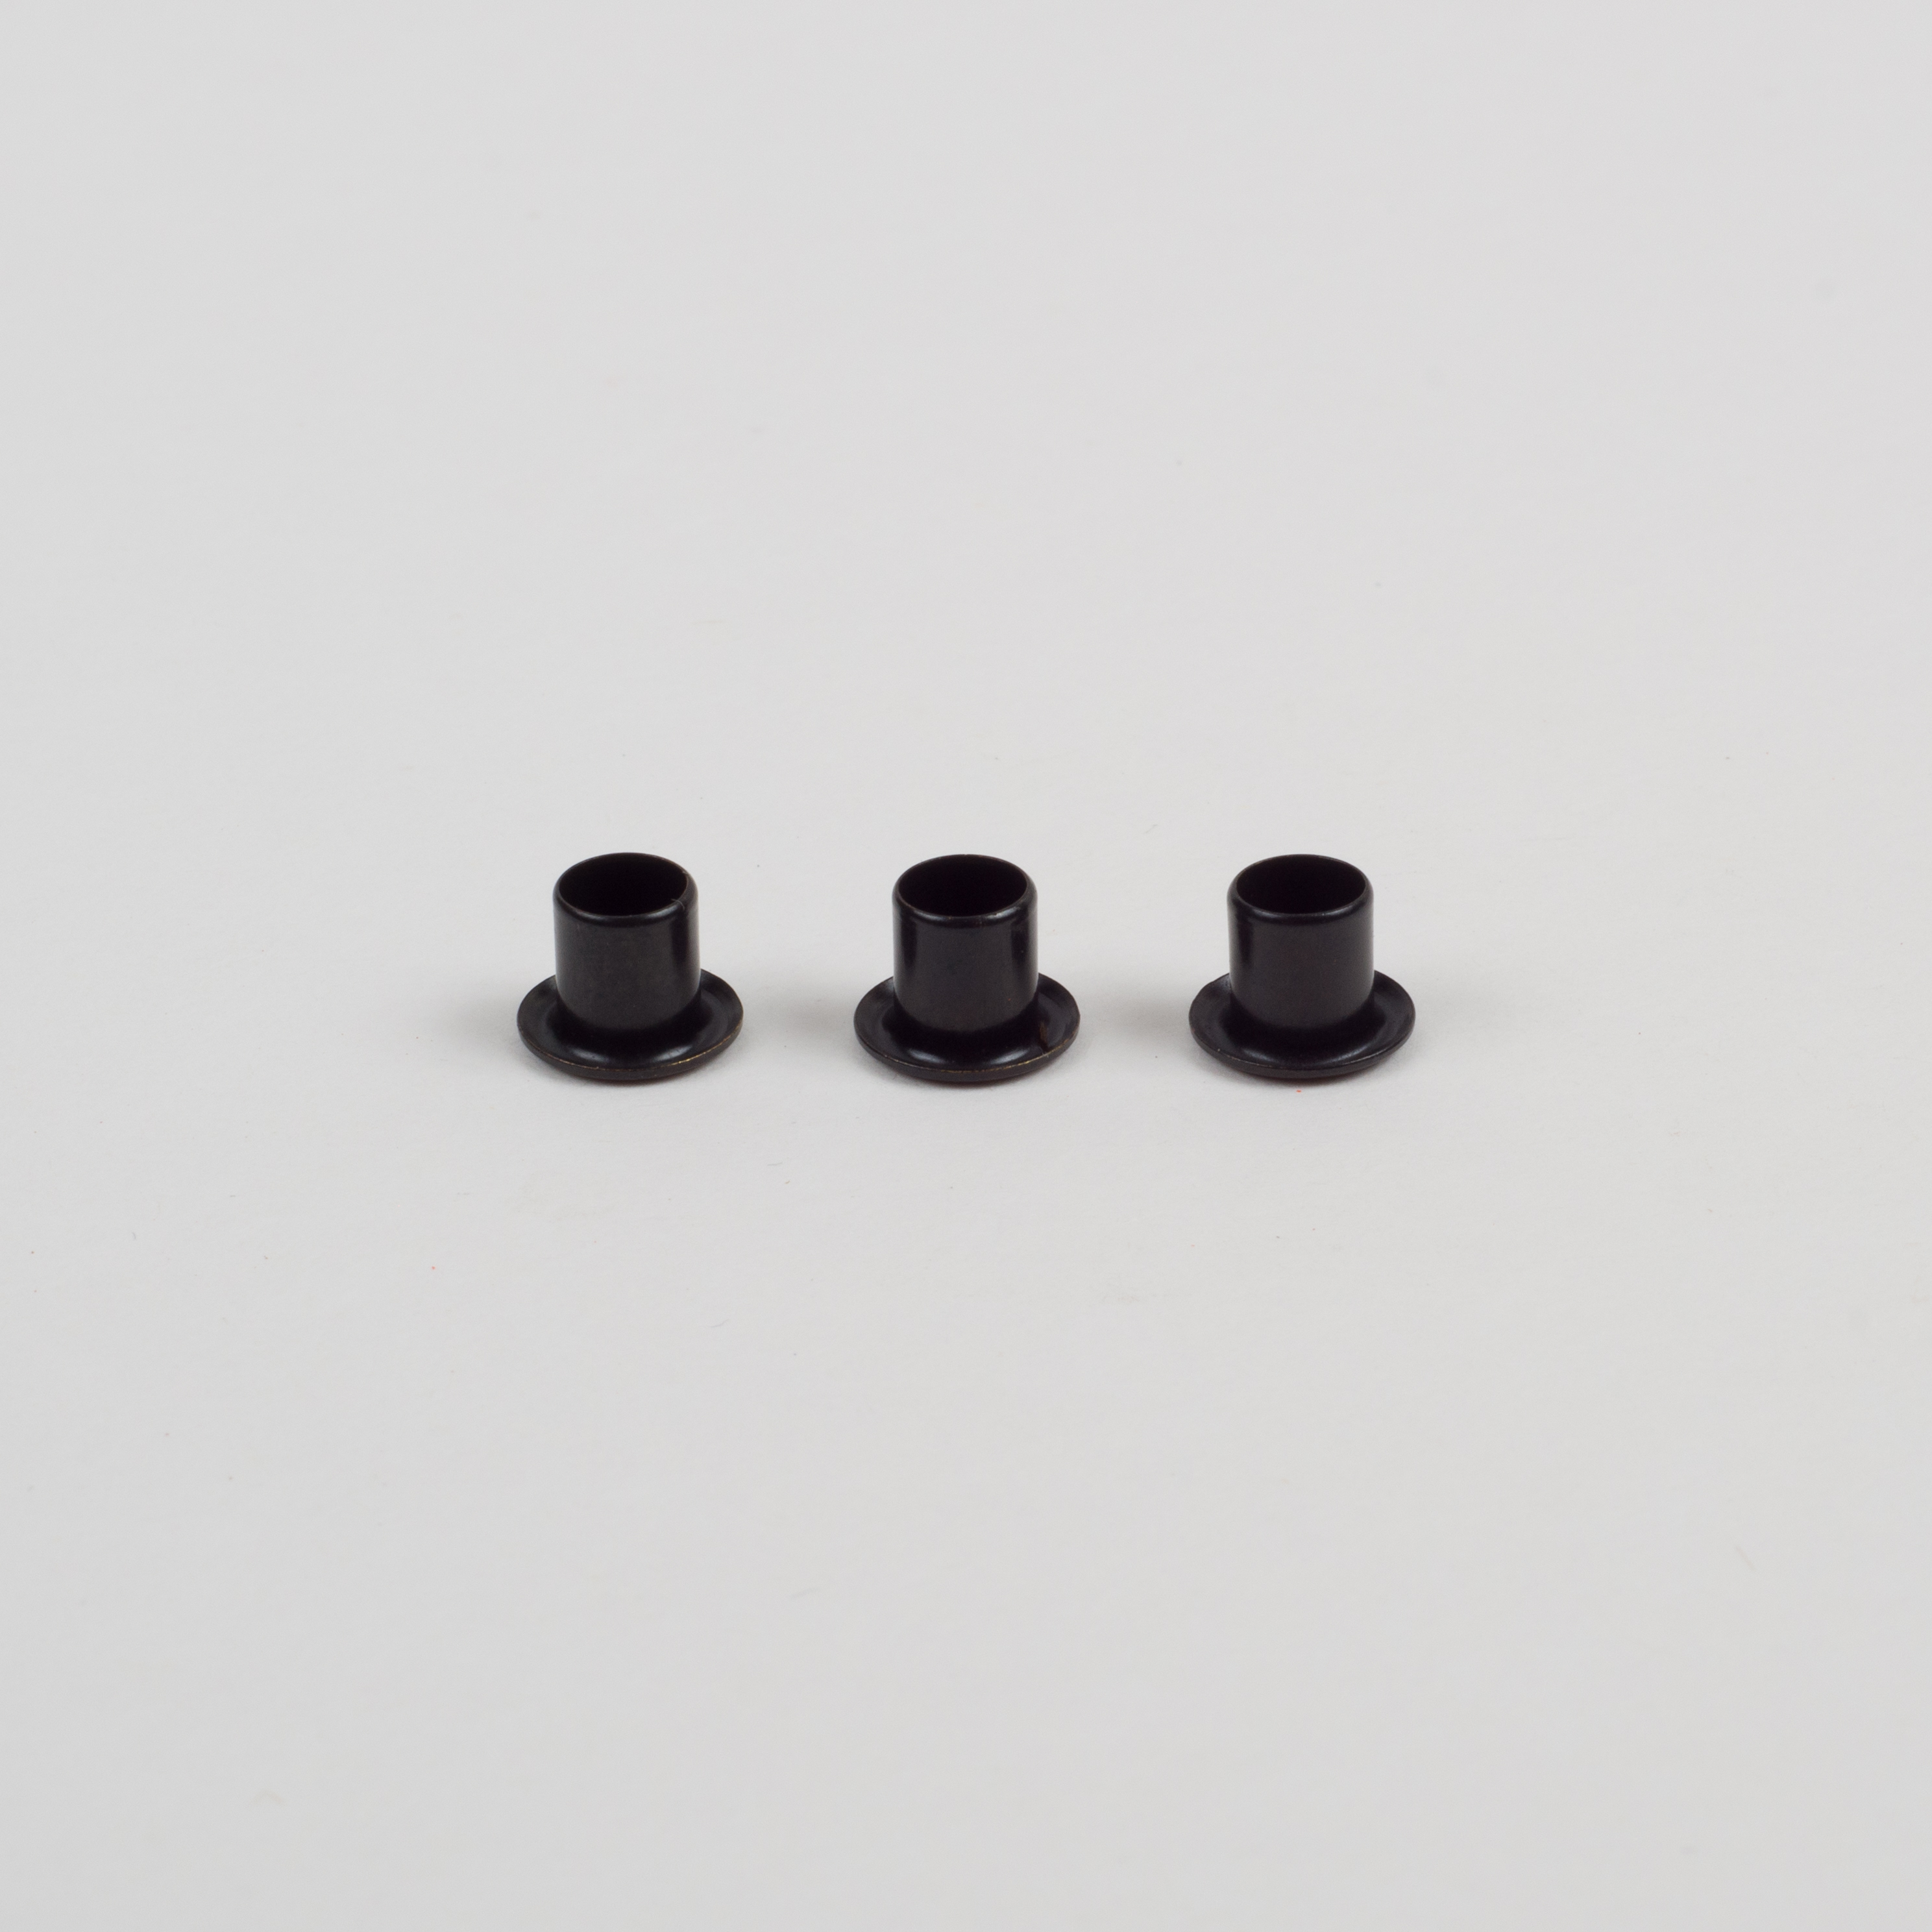 Kydex Material & Supplies Kydex Rivets - Black Coated 8-9 (1